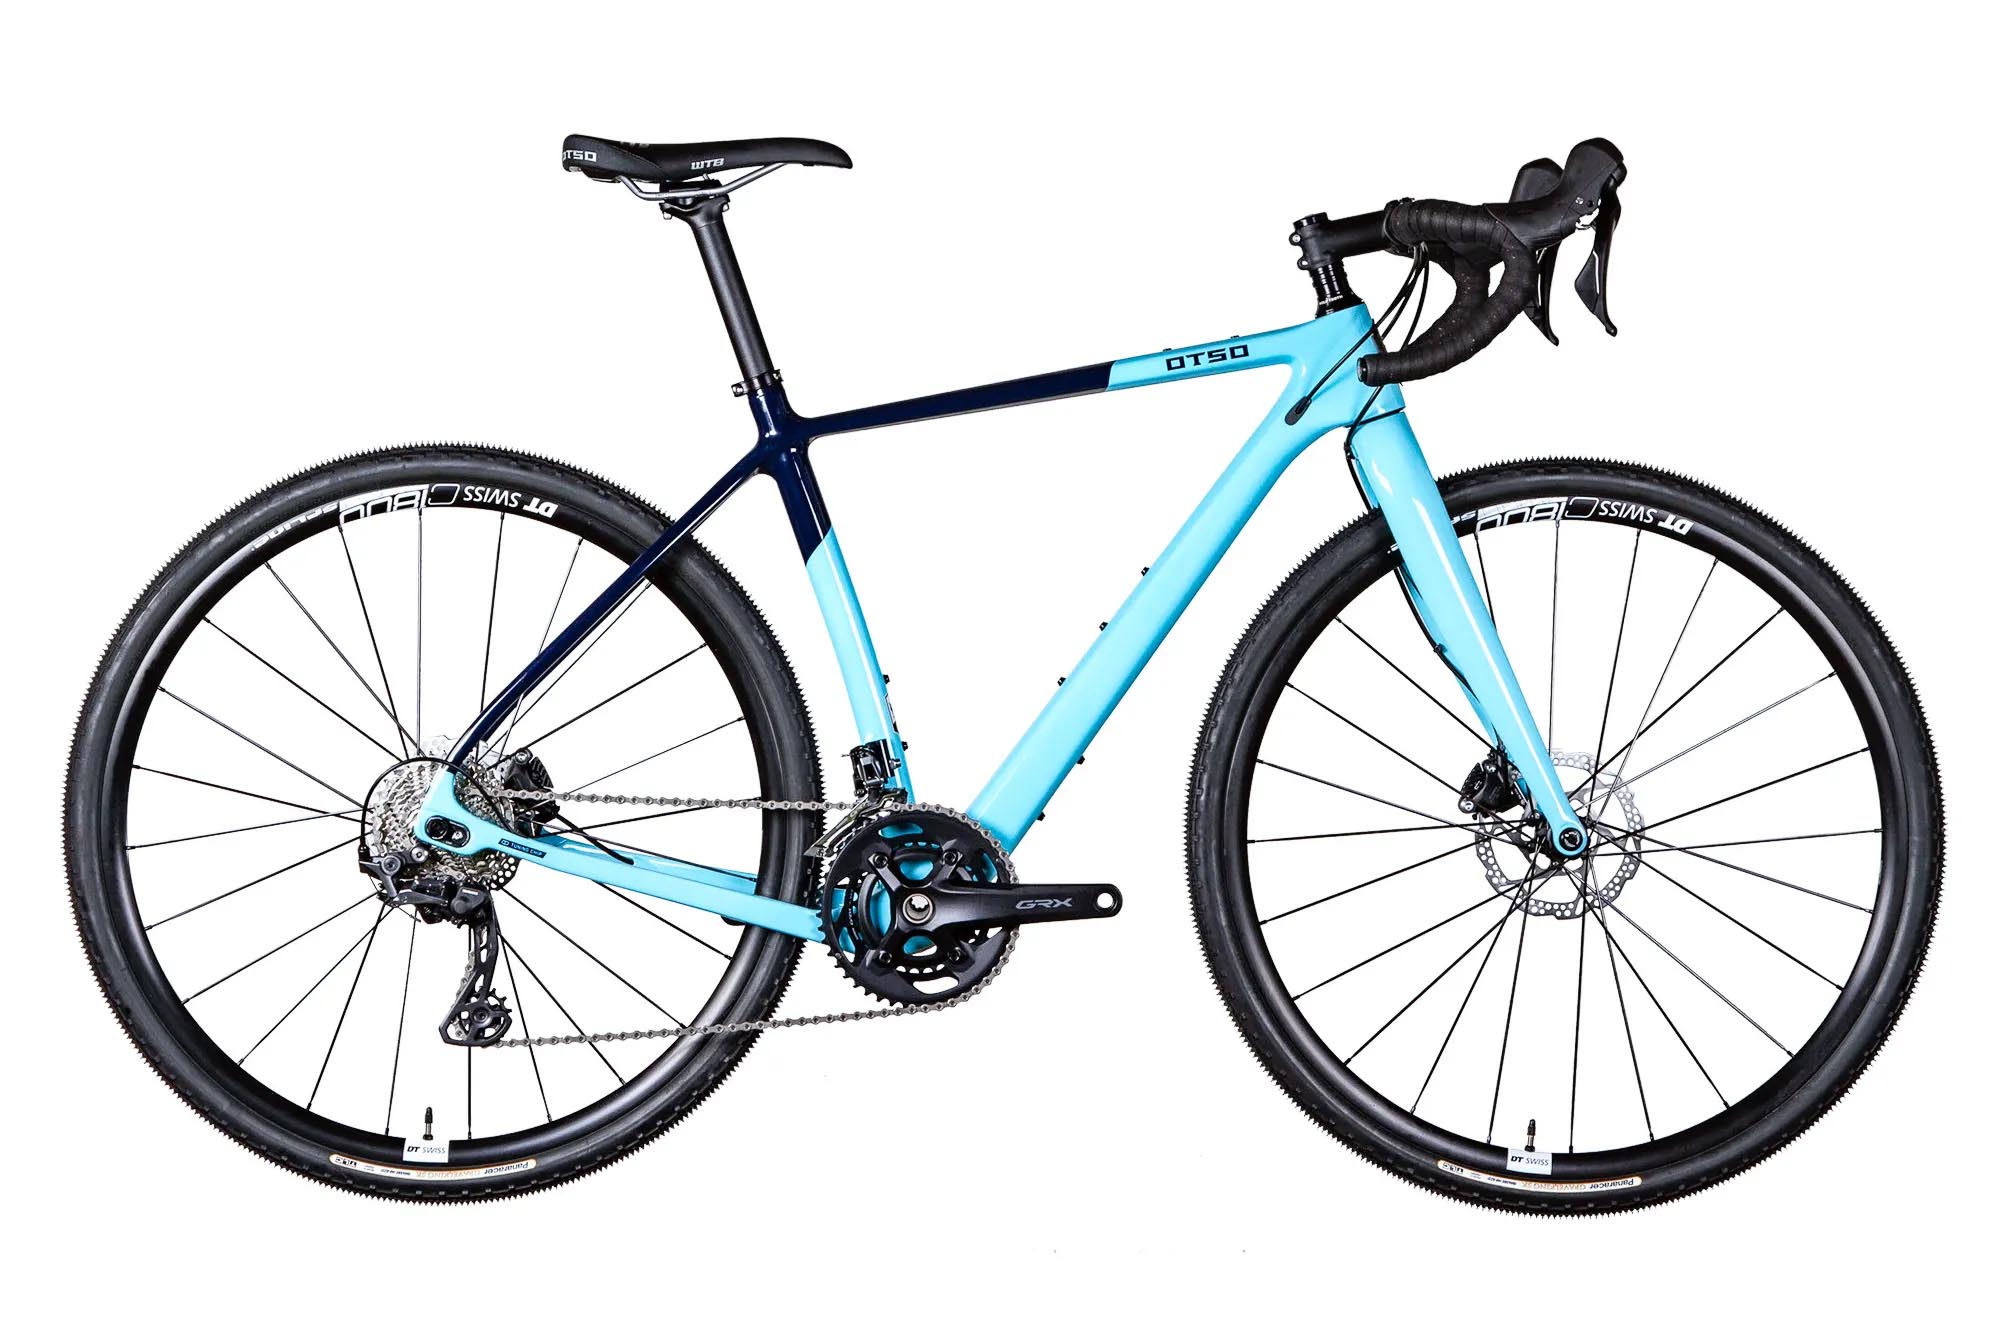 Otso adds new Waheela C frame color for summer, WTC adds more LTD Edition Pack Pliers